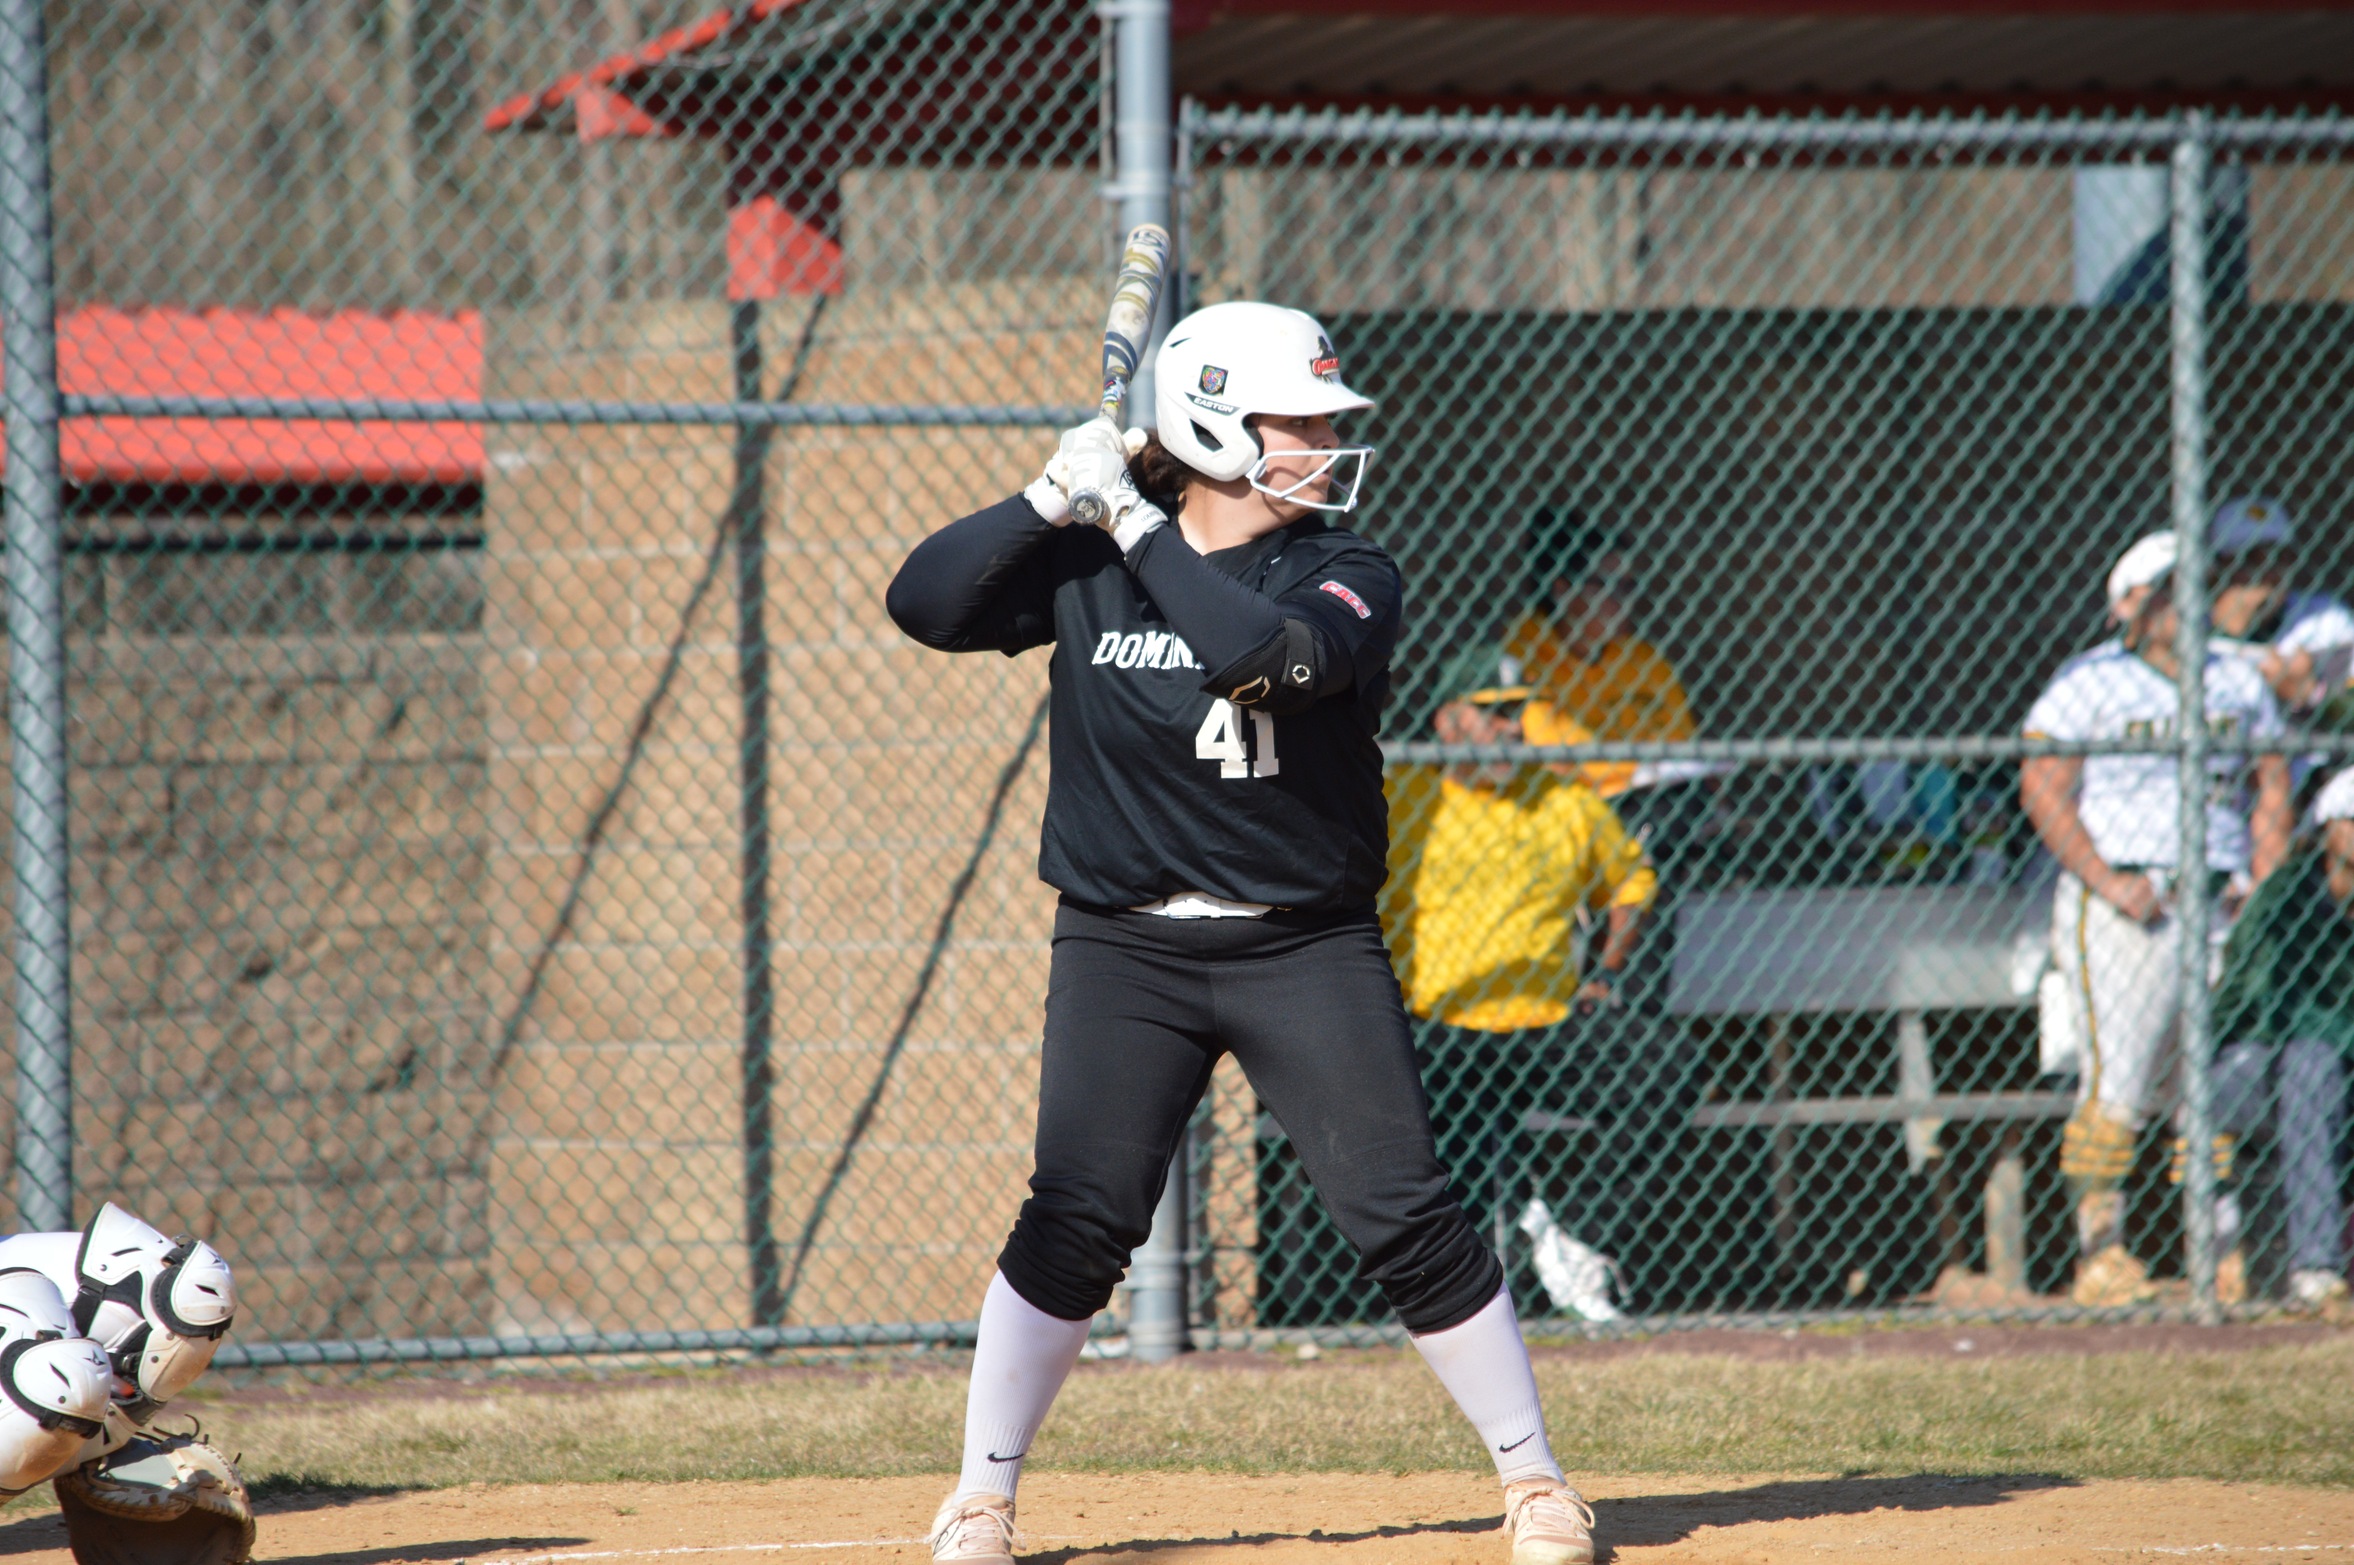 BEARS LATE RALLY IN GAME TWO HELPS COMPLETE SWEEP OVER DOMINICAN SOFTBALL